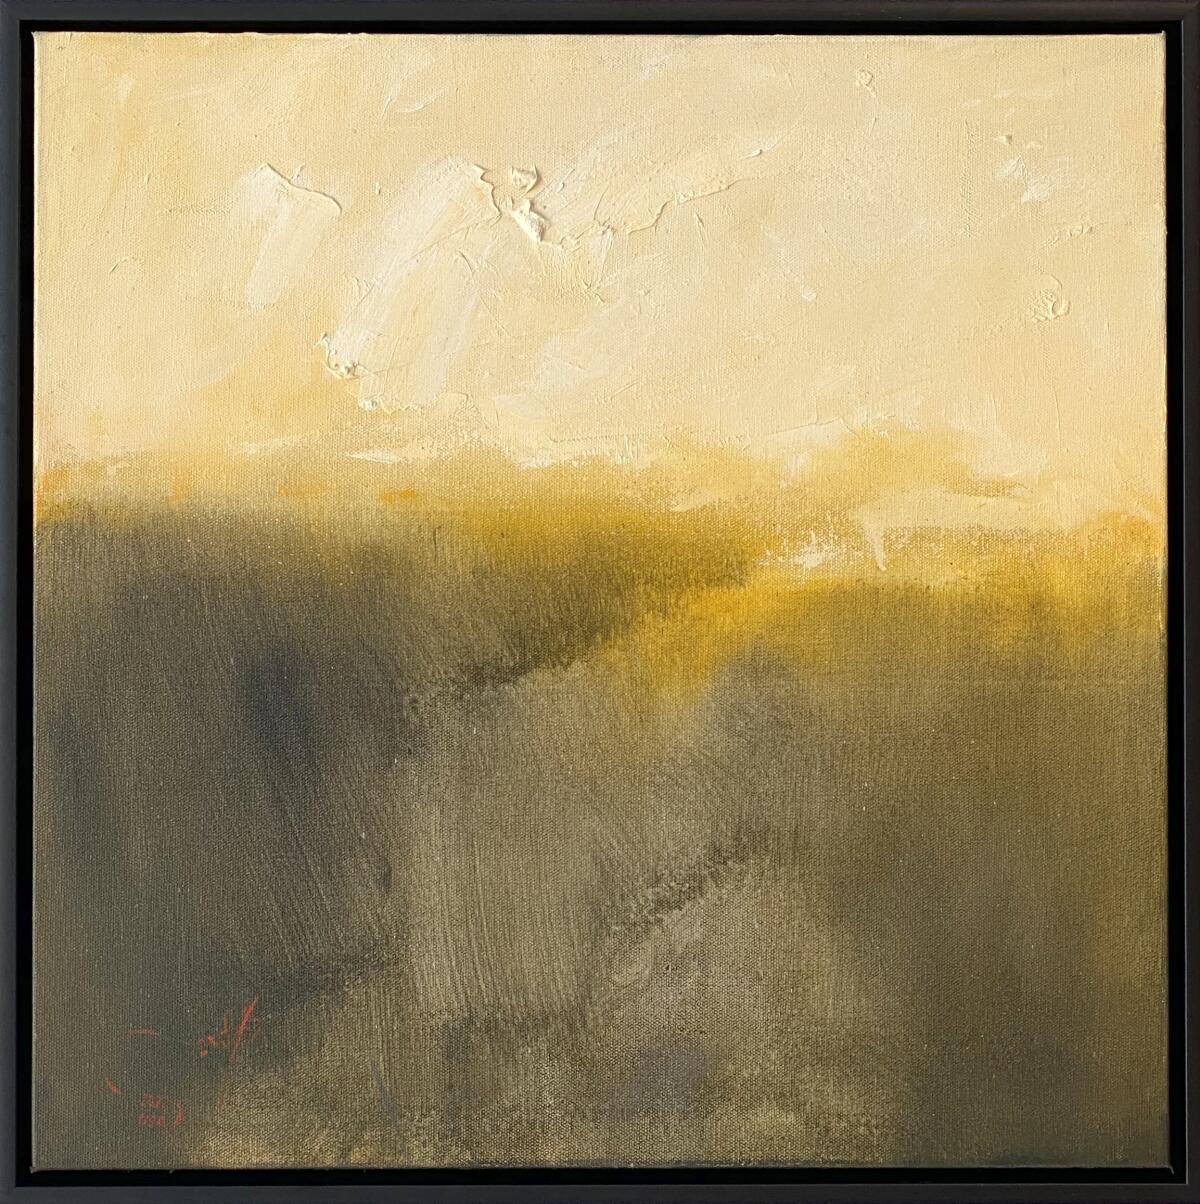 "Warmth," by Khalid Alkaaby, is part of his solo exhibition at Sparks Gallery titled "The Path of Light."